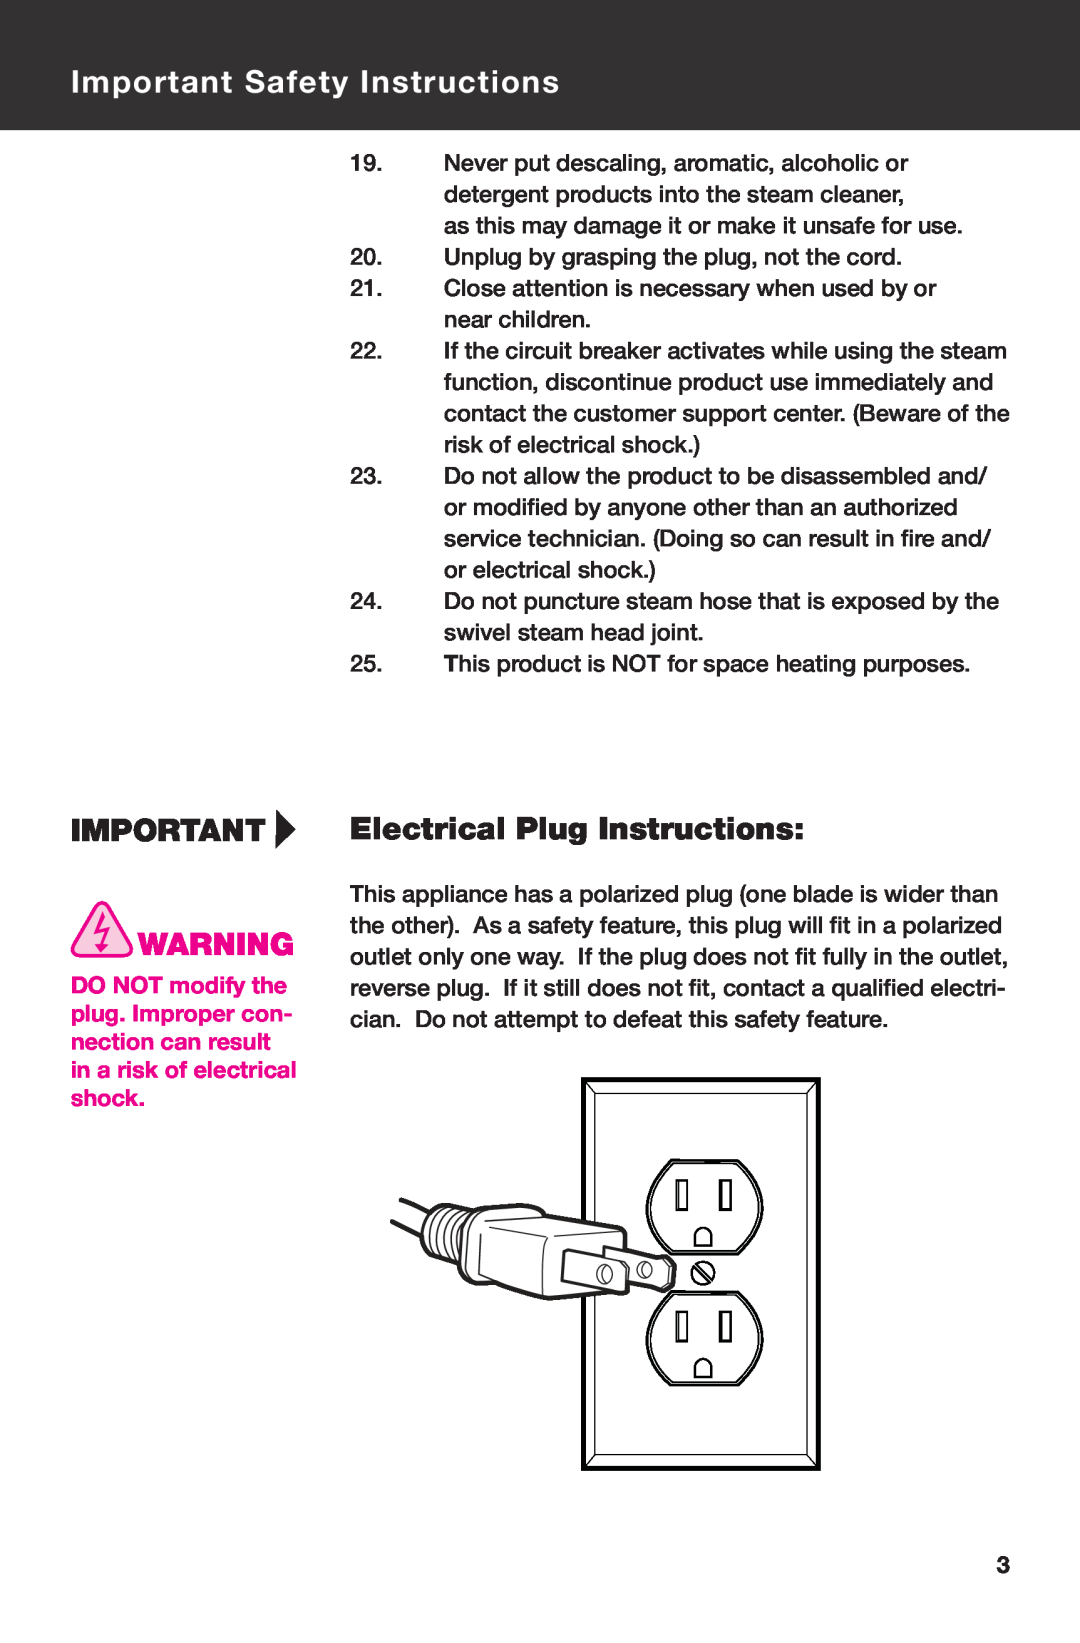 Haan HD-60 instruction manual Electrical Plug Instructions, Important Safety Instructions 